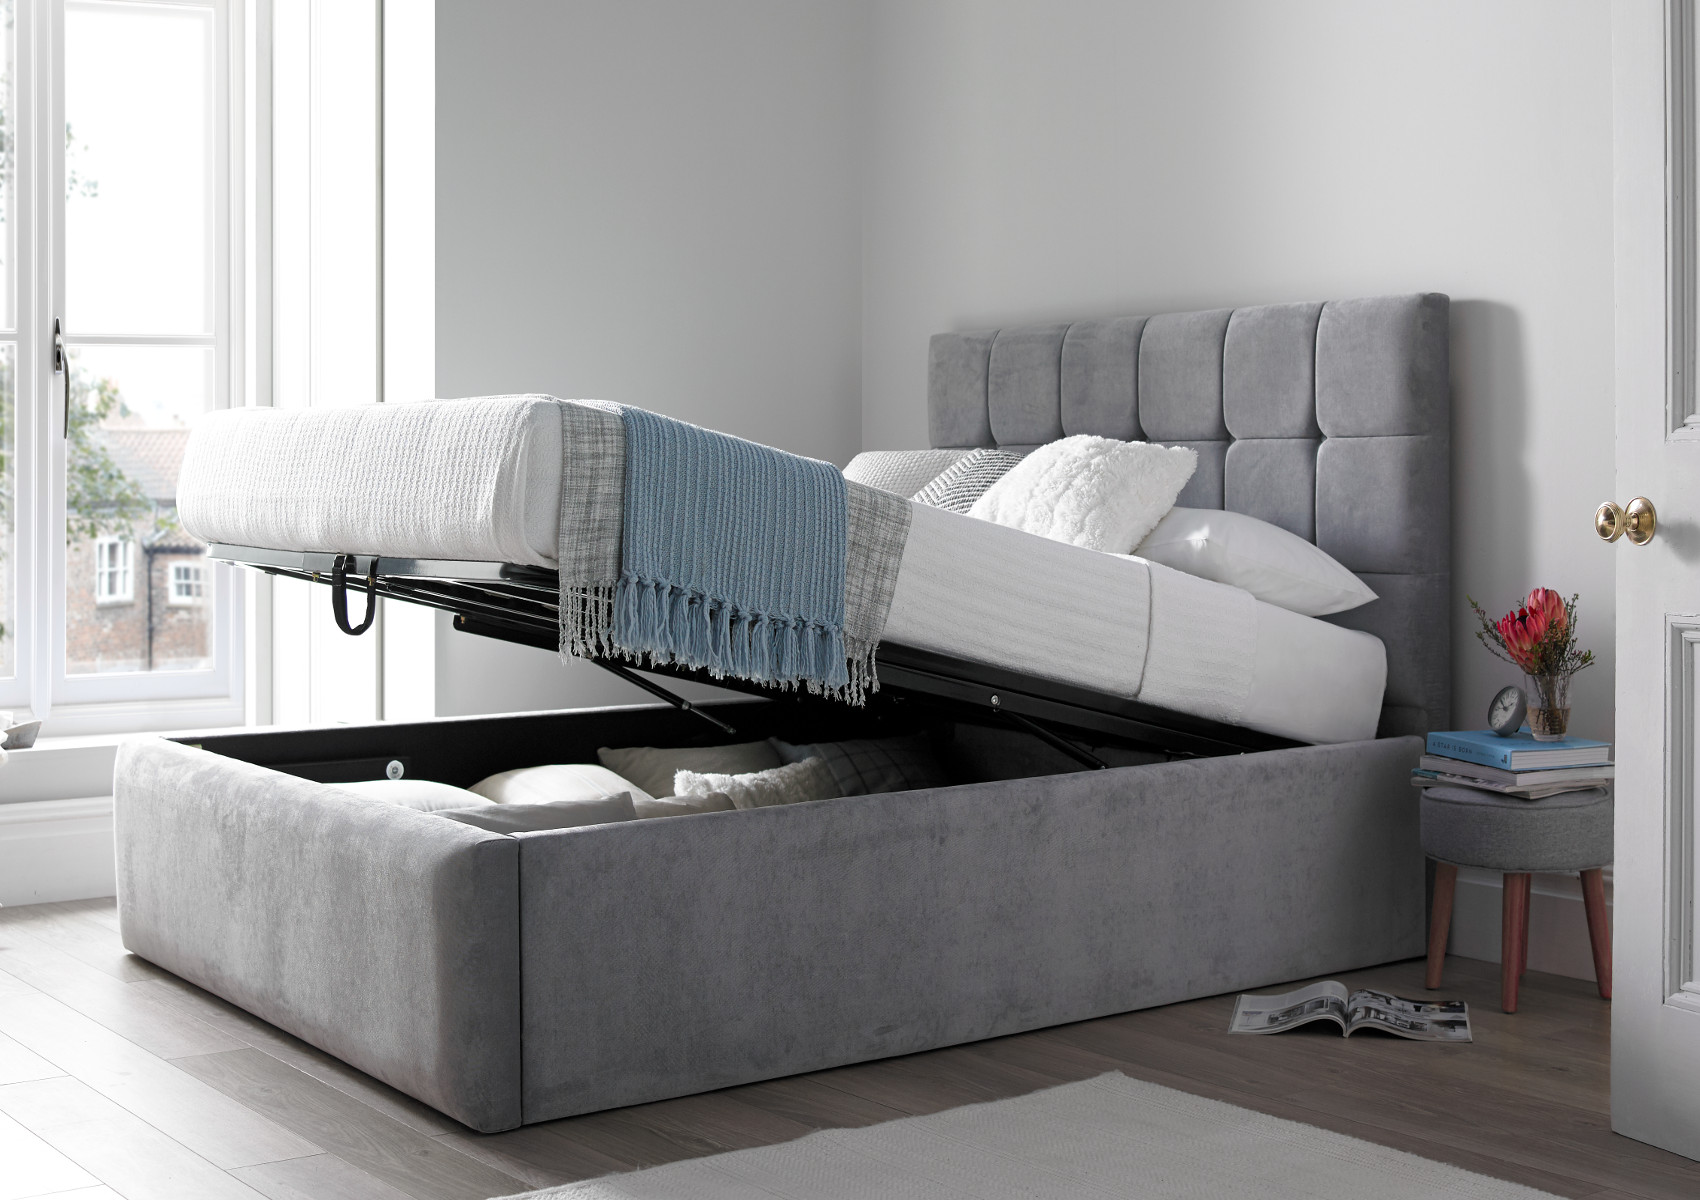 View Bromley Shetland Mercury Upholstered Compact Double Ottoman Bed Time4Sleep information